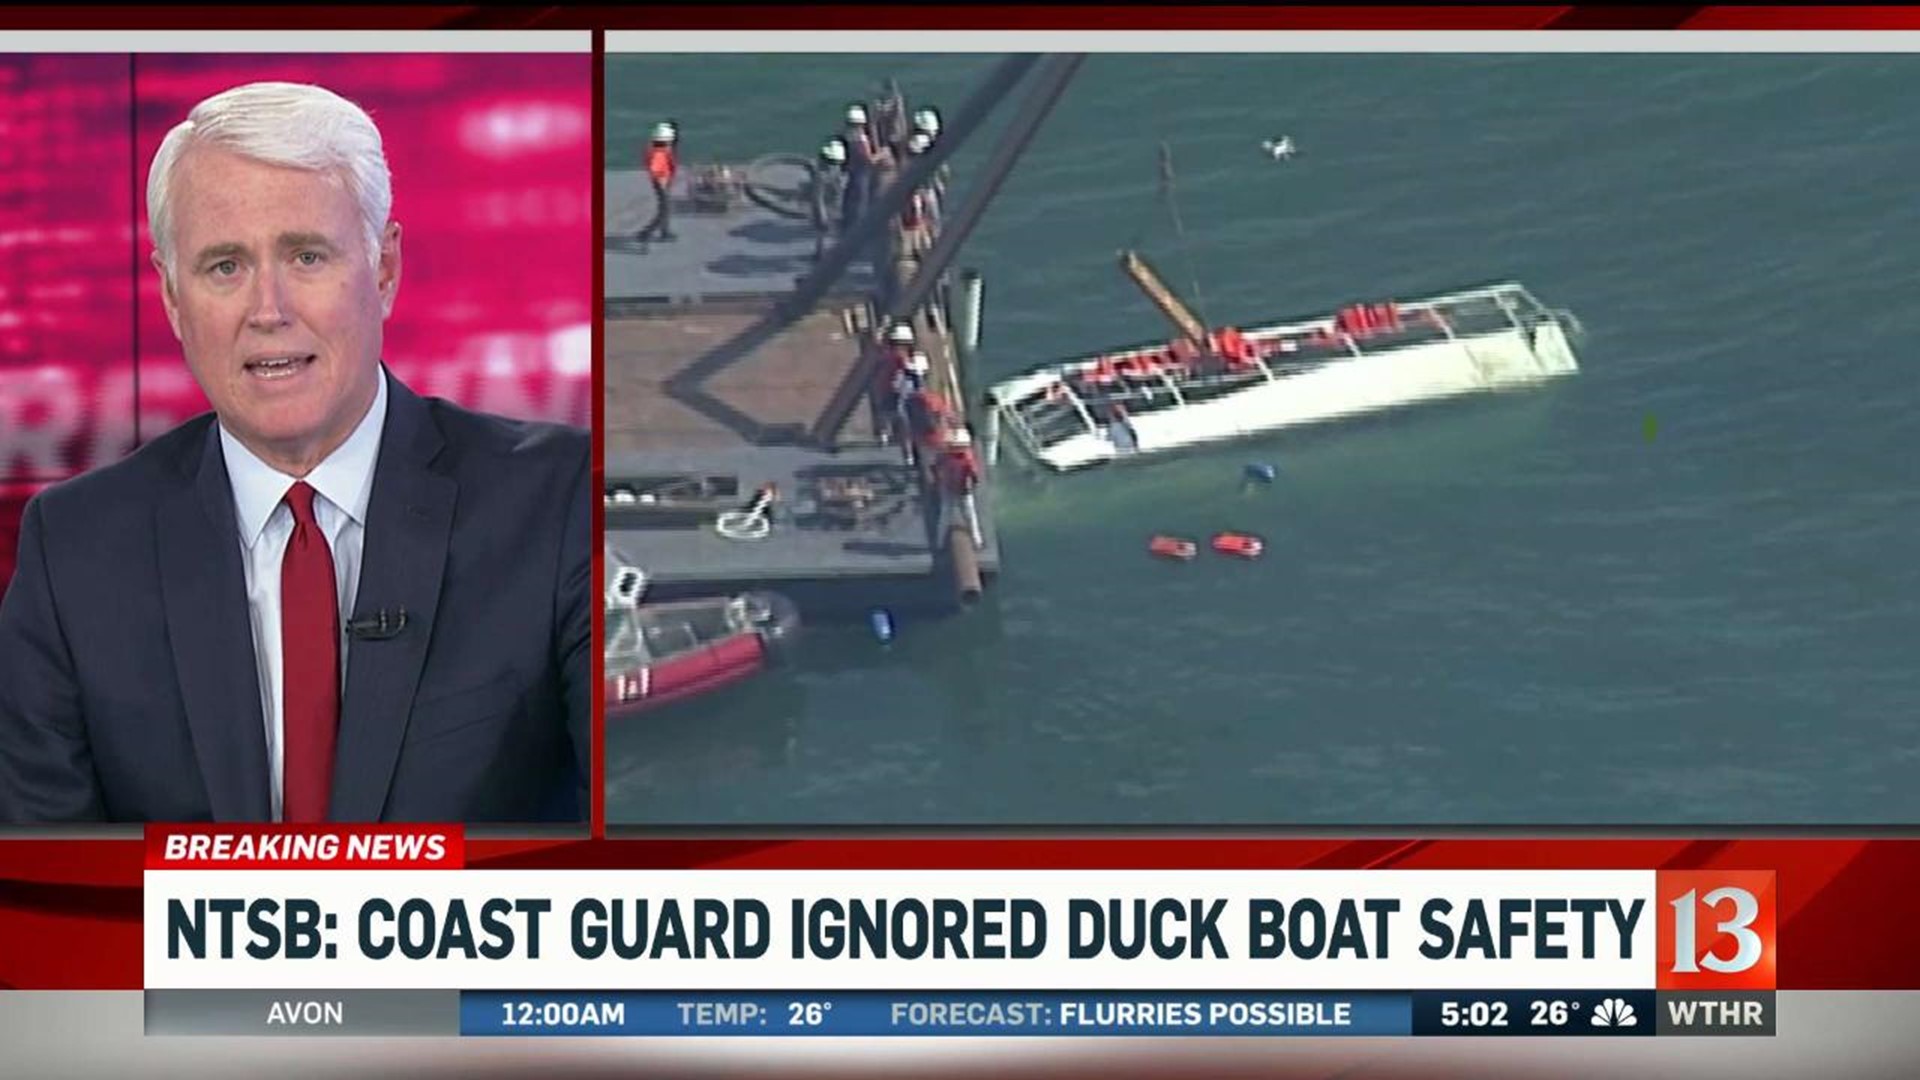 Coast Guard ignored Duck Boat safety